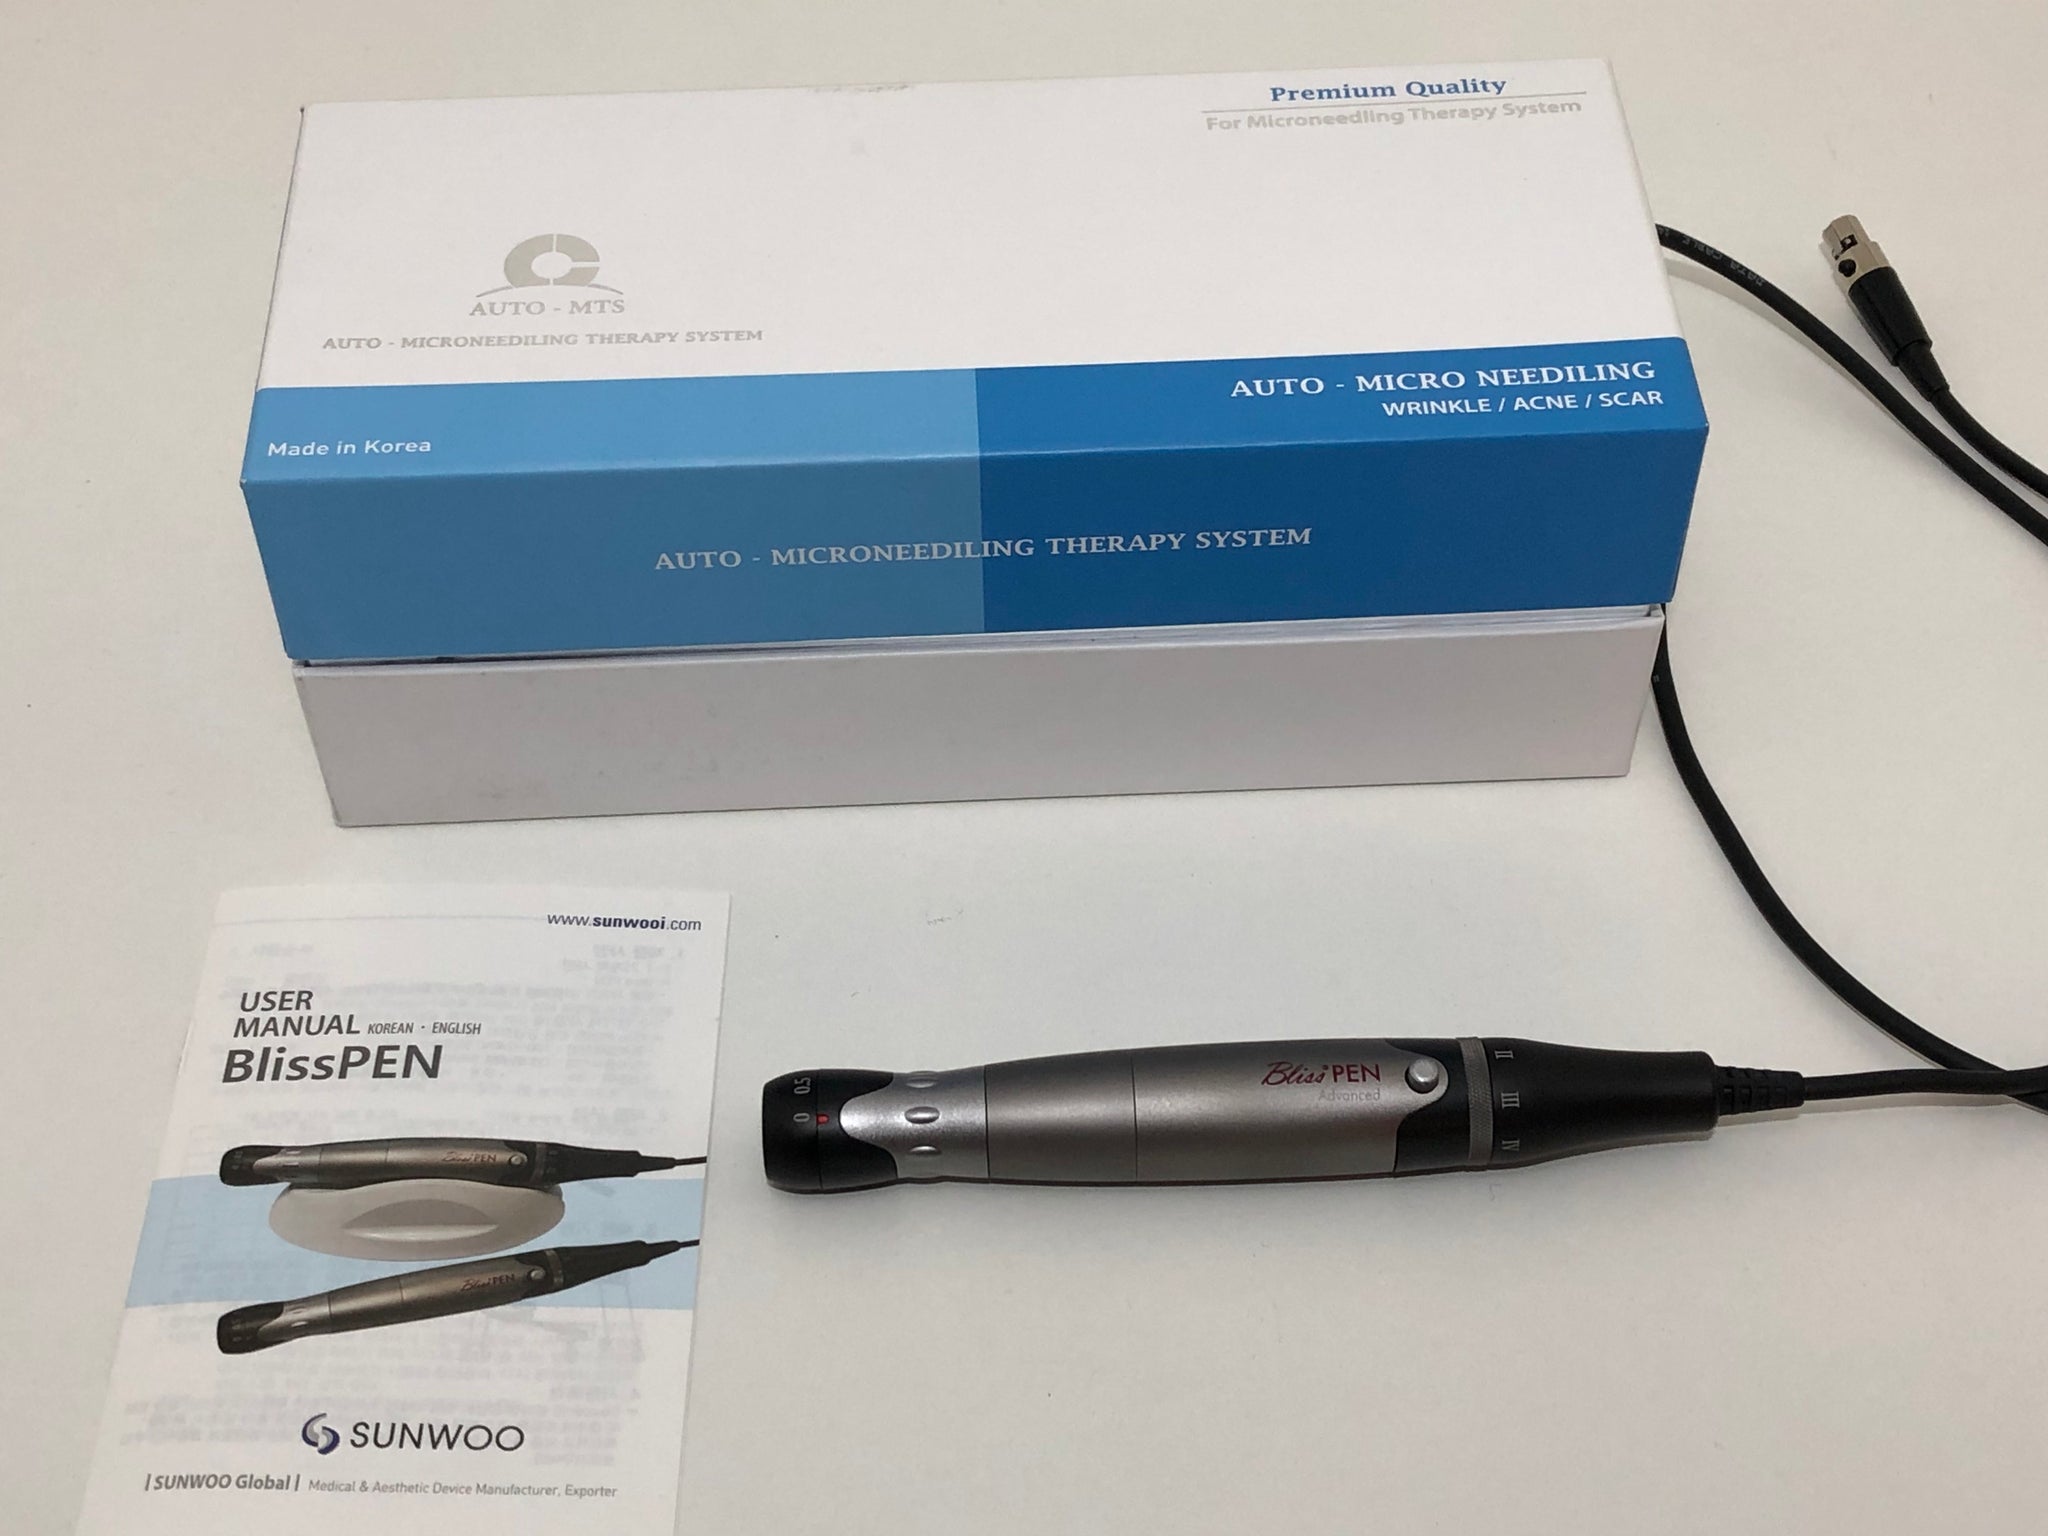 BLISS PEN MICRO-NEEDLING THERAPY SYSTEM